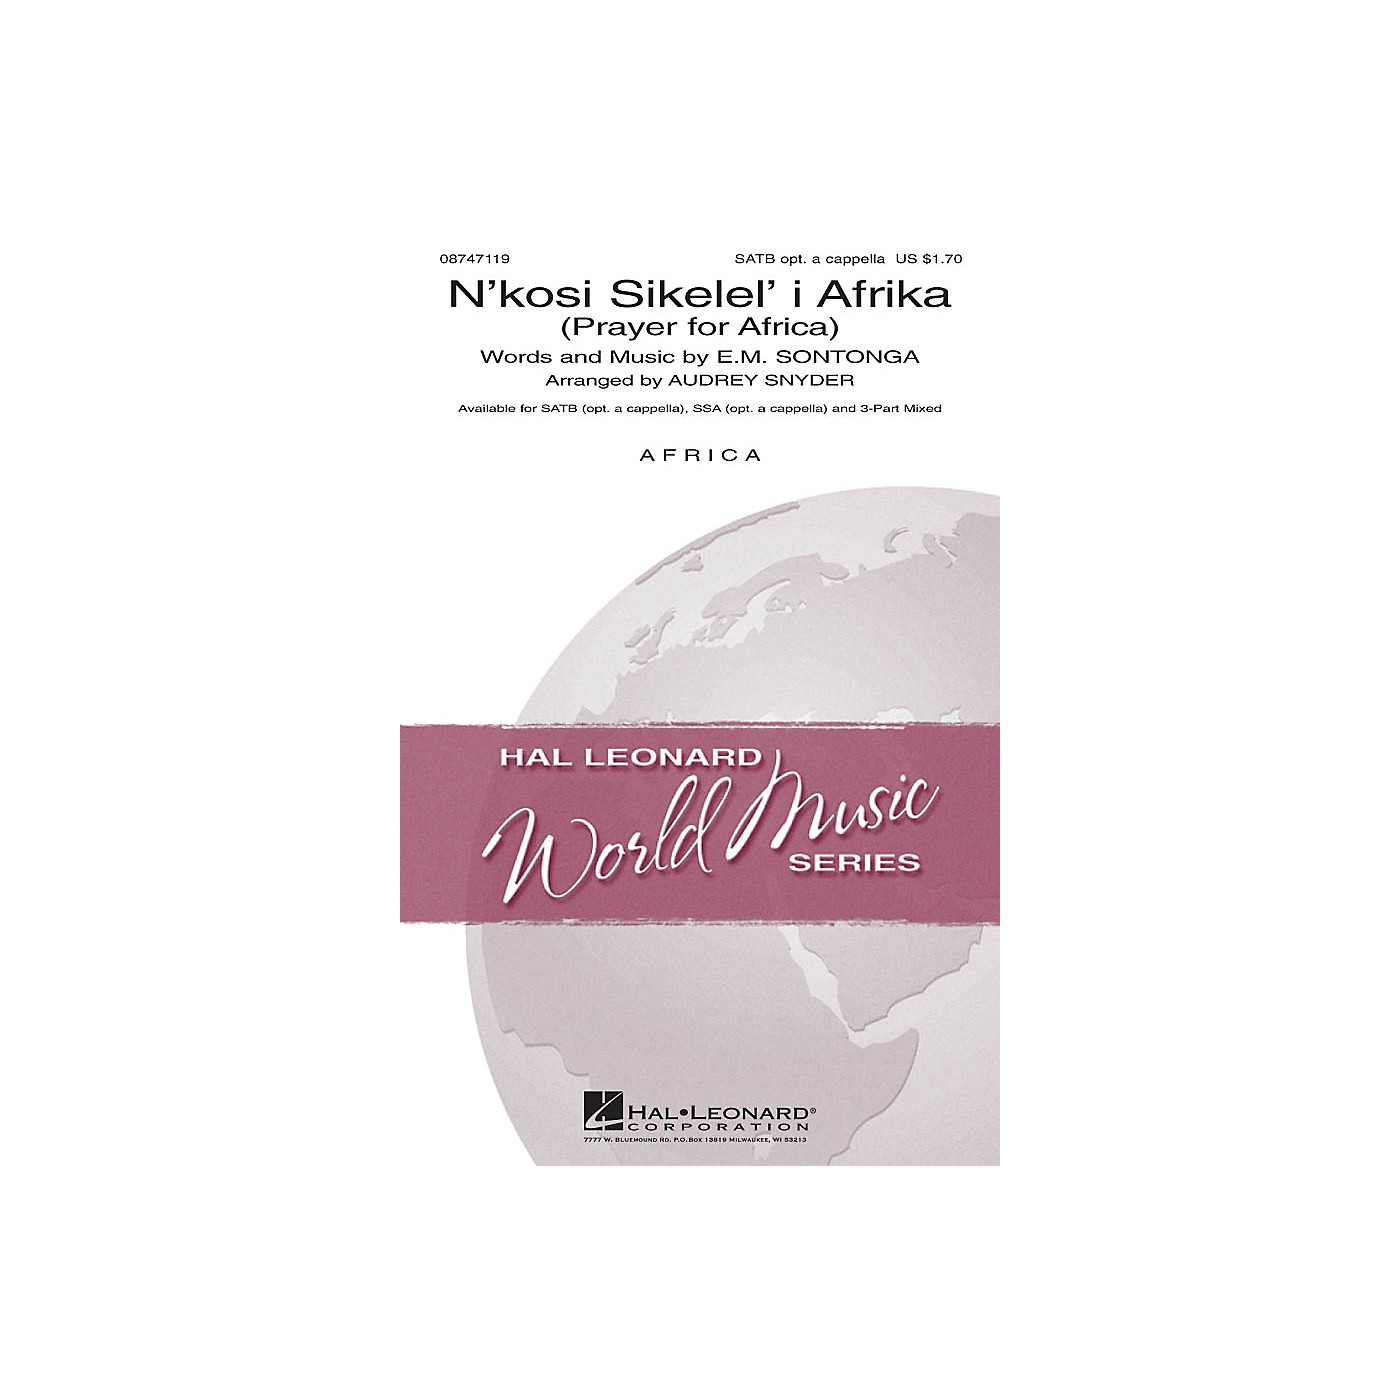 Hal Leonard N'kosi Sikelel' I Afrika (Prayer for Africa) SSA Optional a cappella Arranged by Audrey Snyder thumbnail